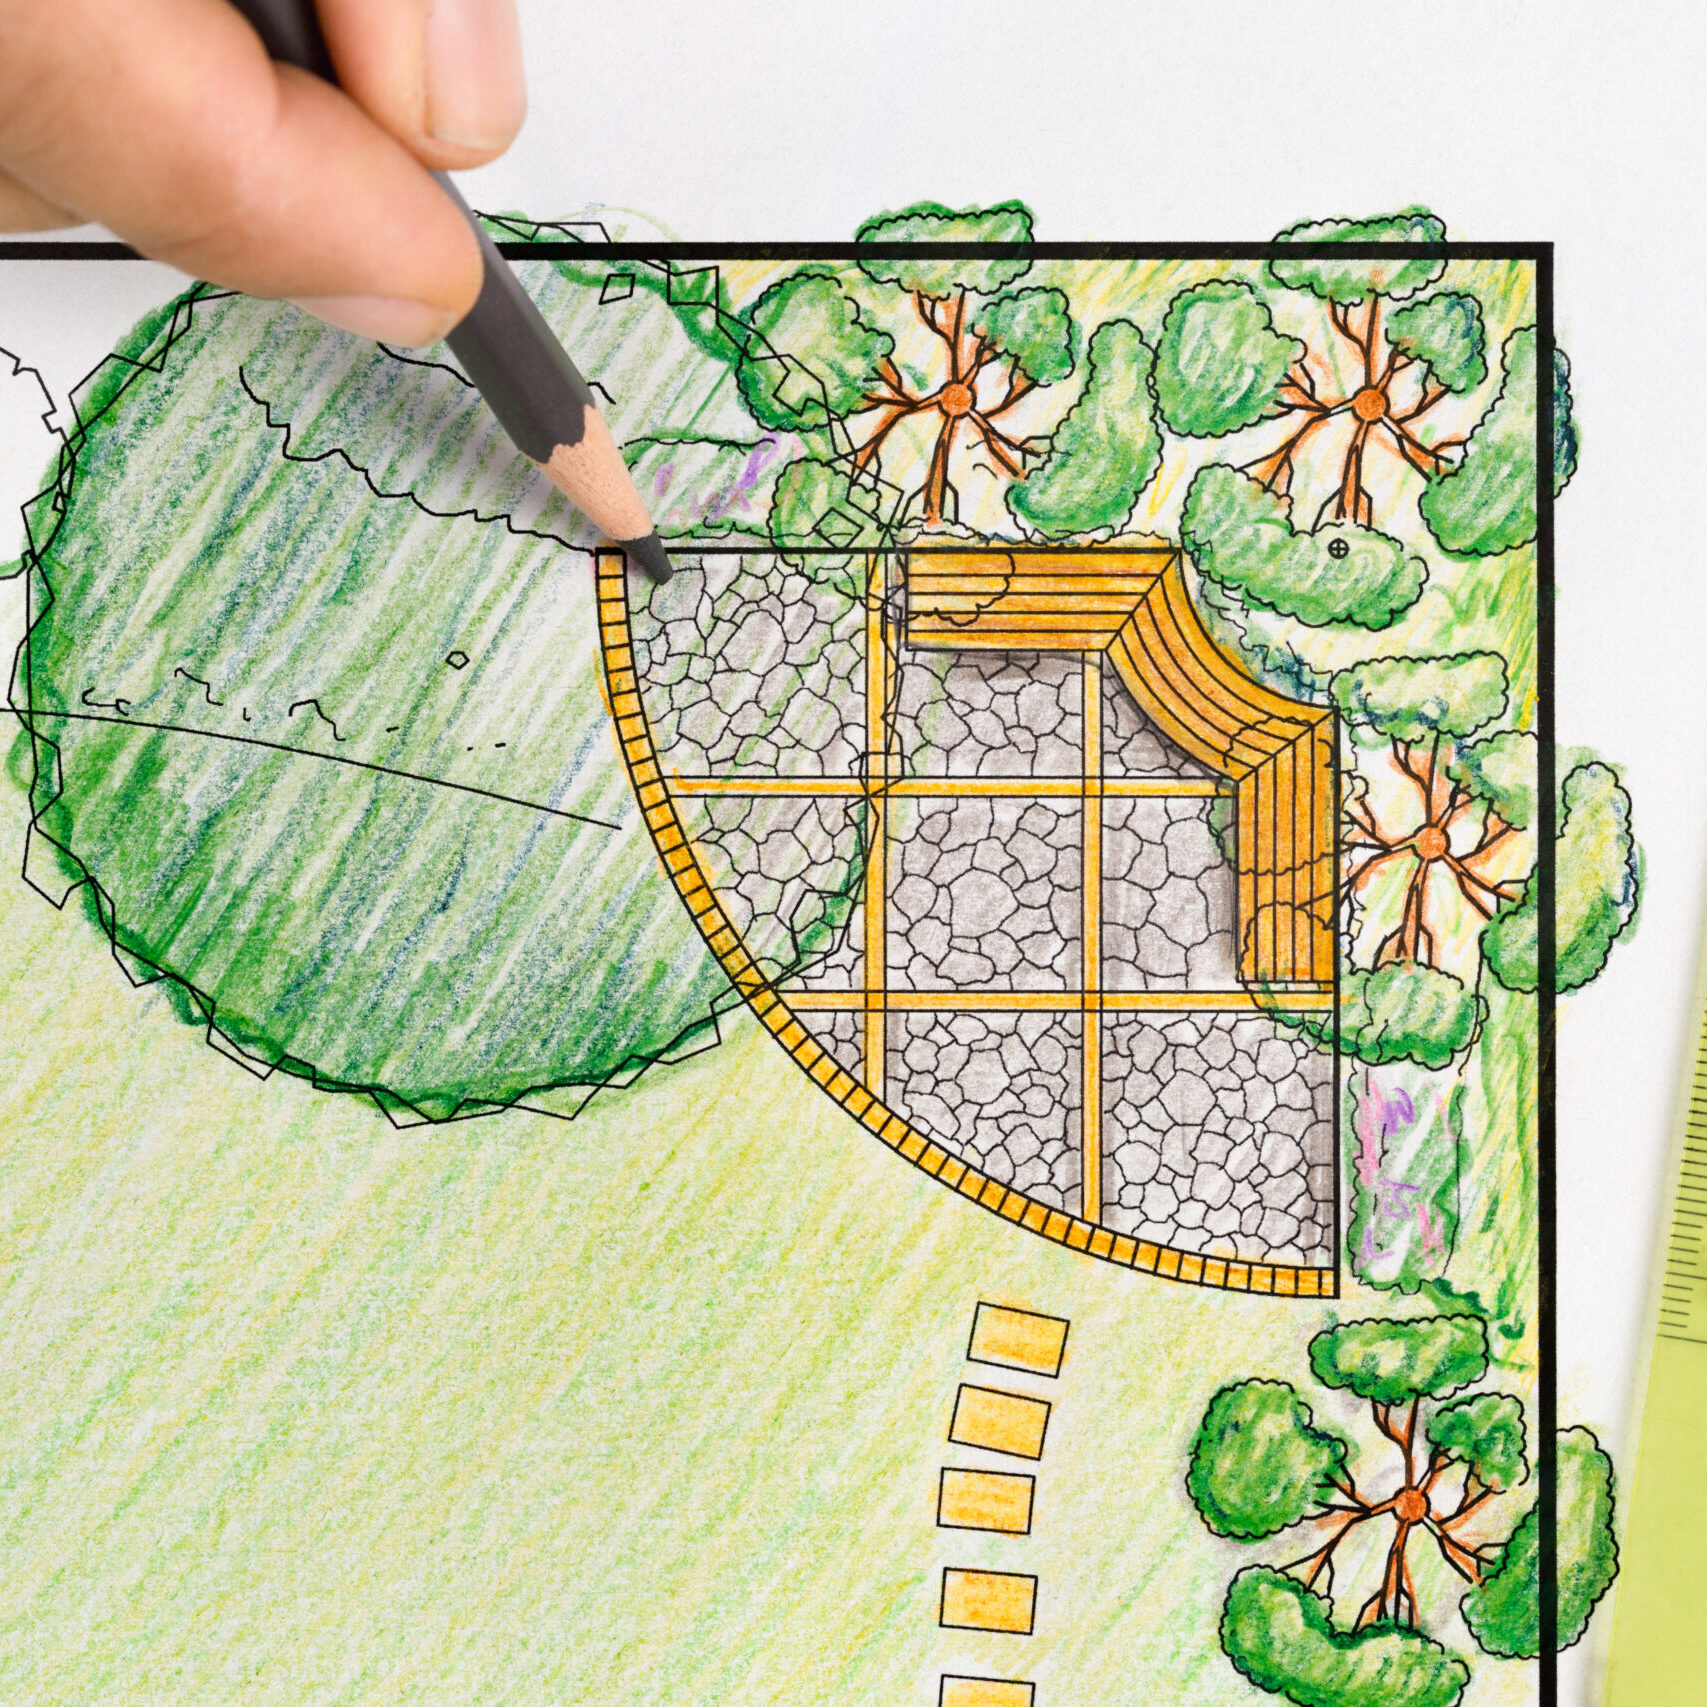 Hand drawing a well-designed landscape plan